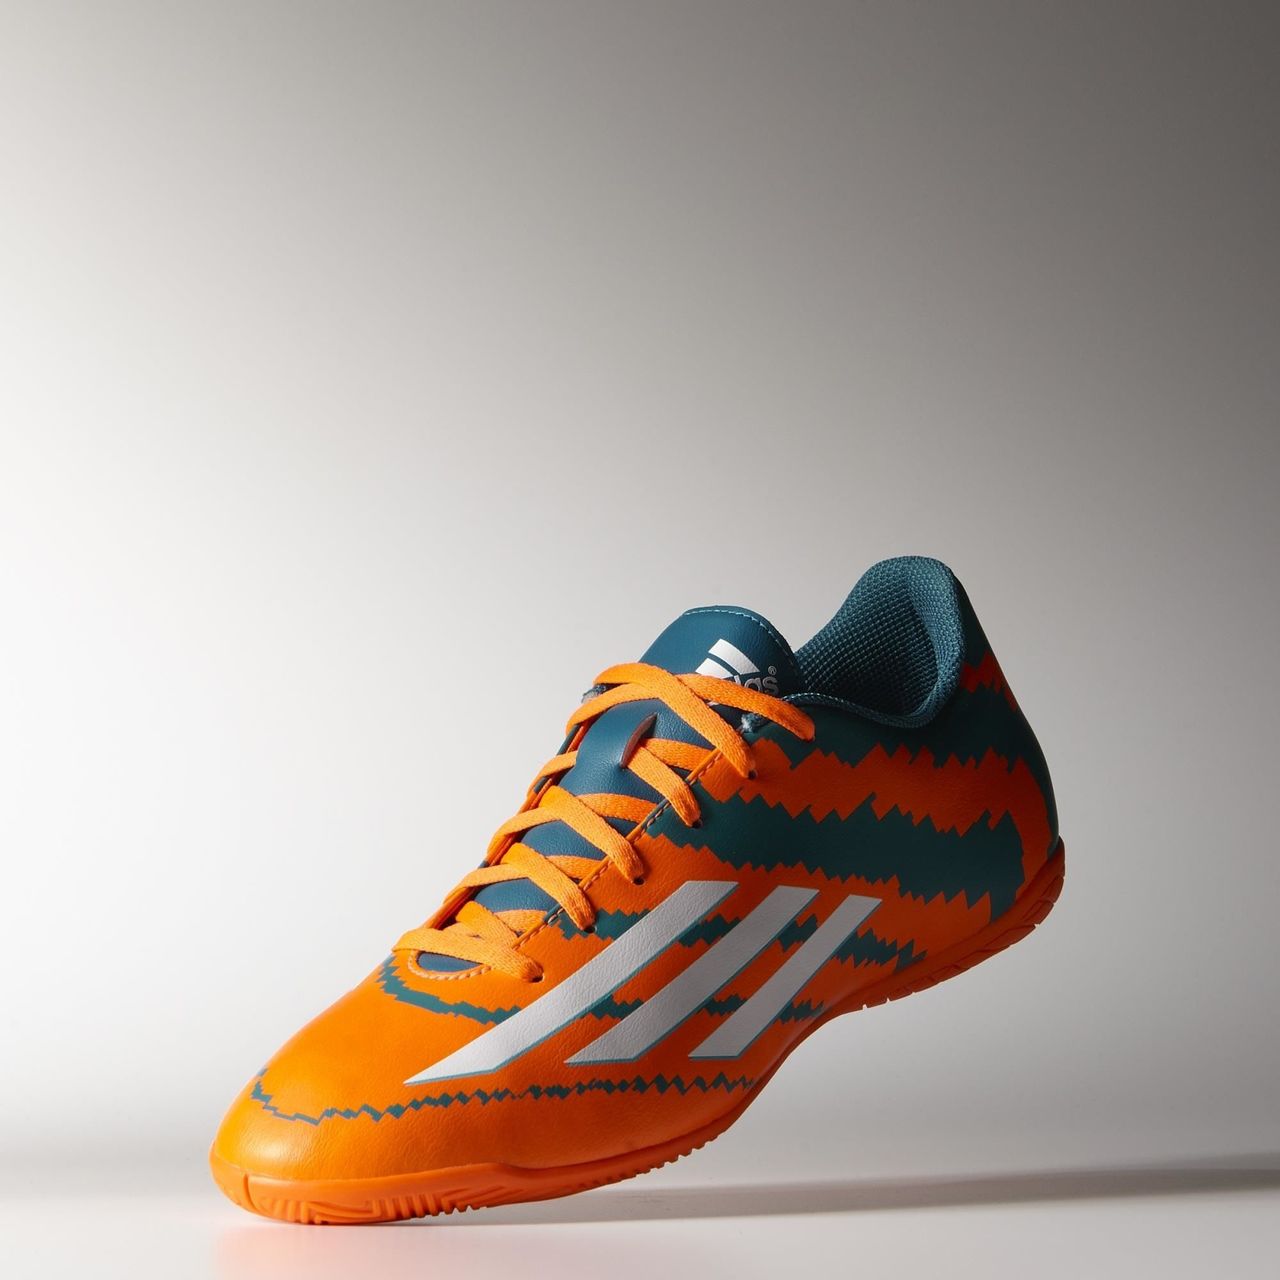 Wreck gambling Unpretentious Adidas Messi mirosar10 10.4 IN Shoes - Power Teal / Ftwr White / Solar  Orange - Football Shirt Culture - Latest Football Kit News and More